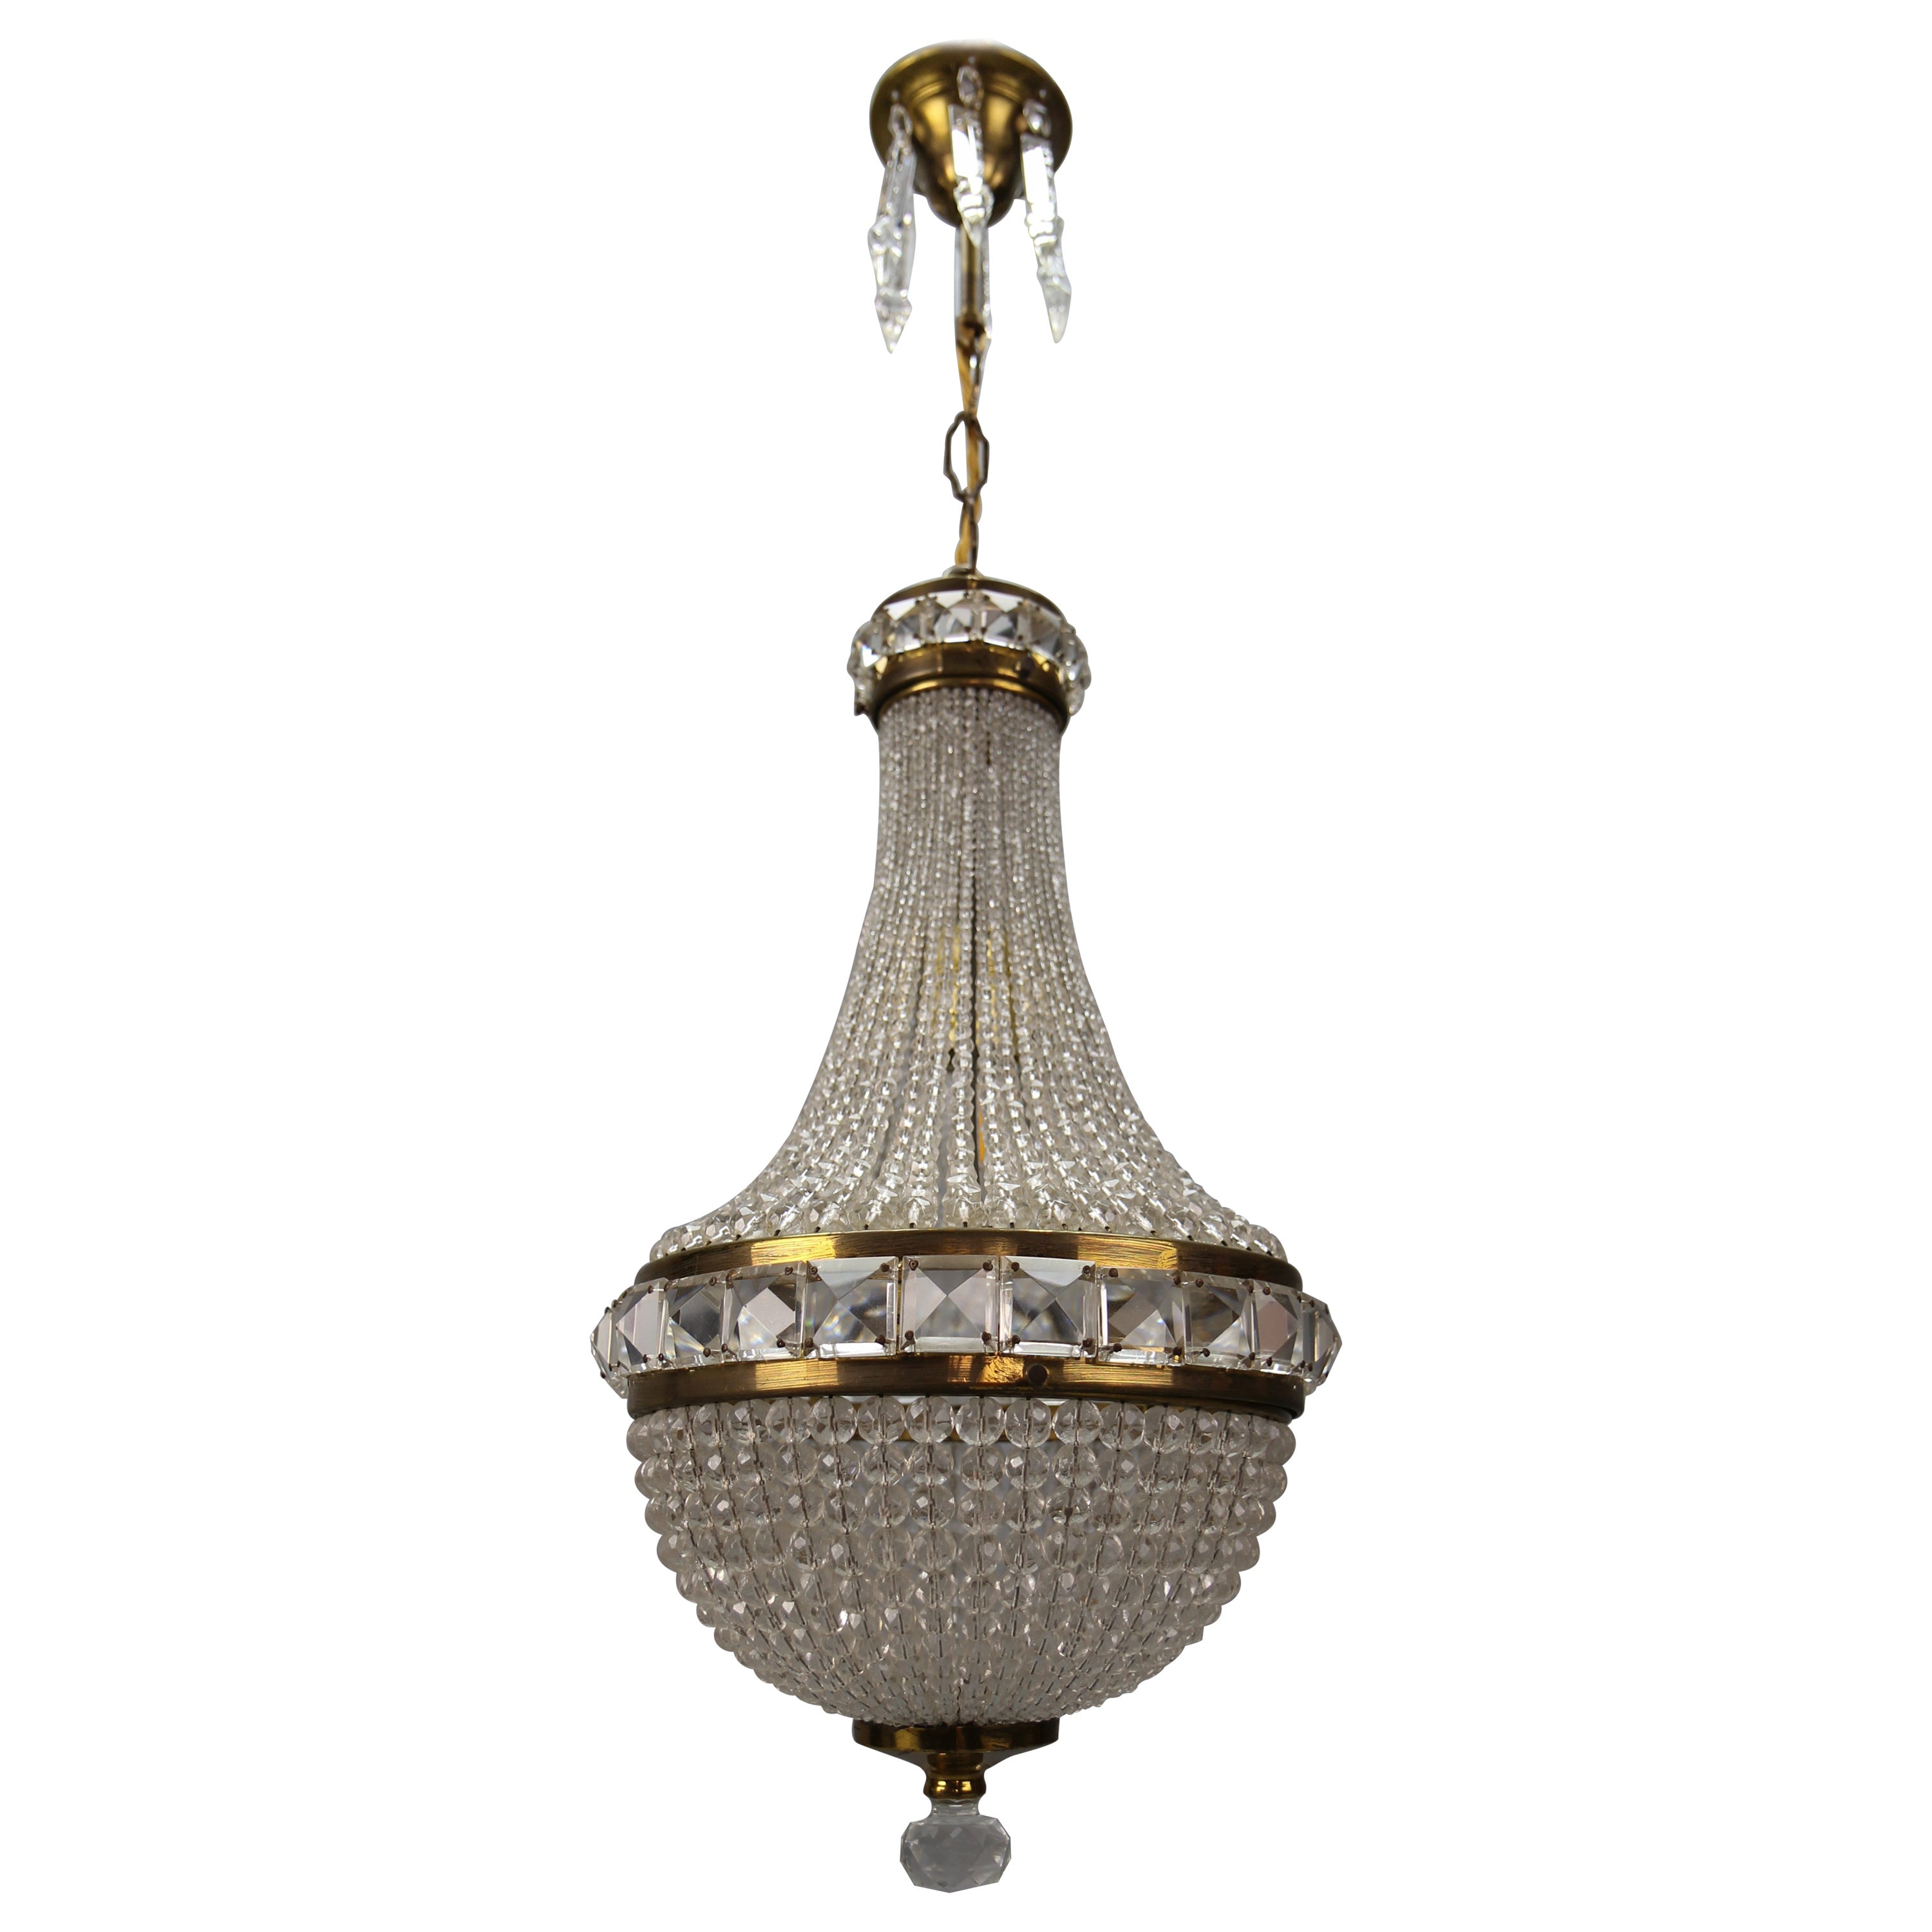 Czech Crystal Beaded Empire Style Dome Chandelier For Sale